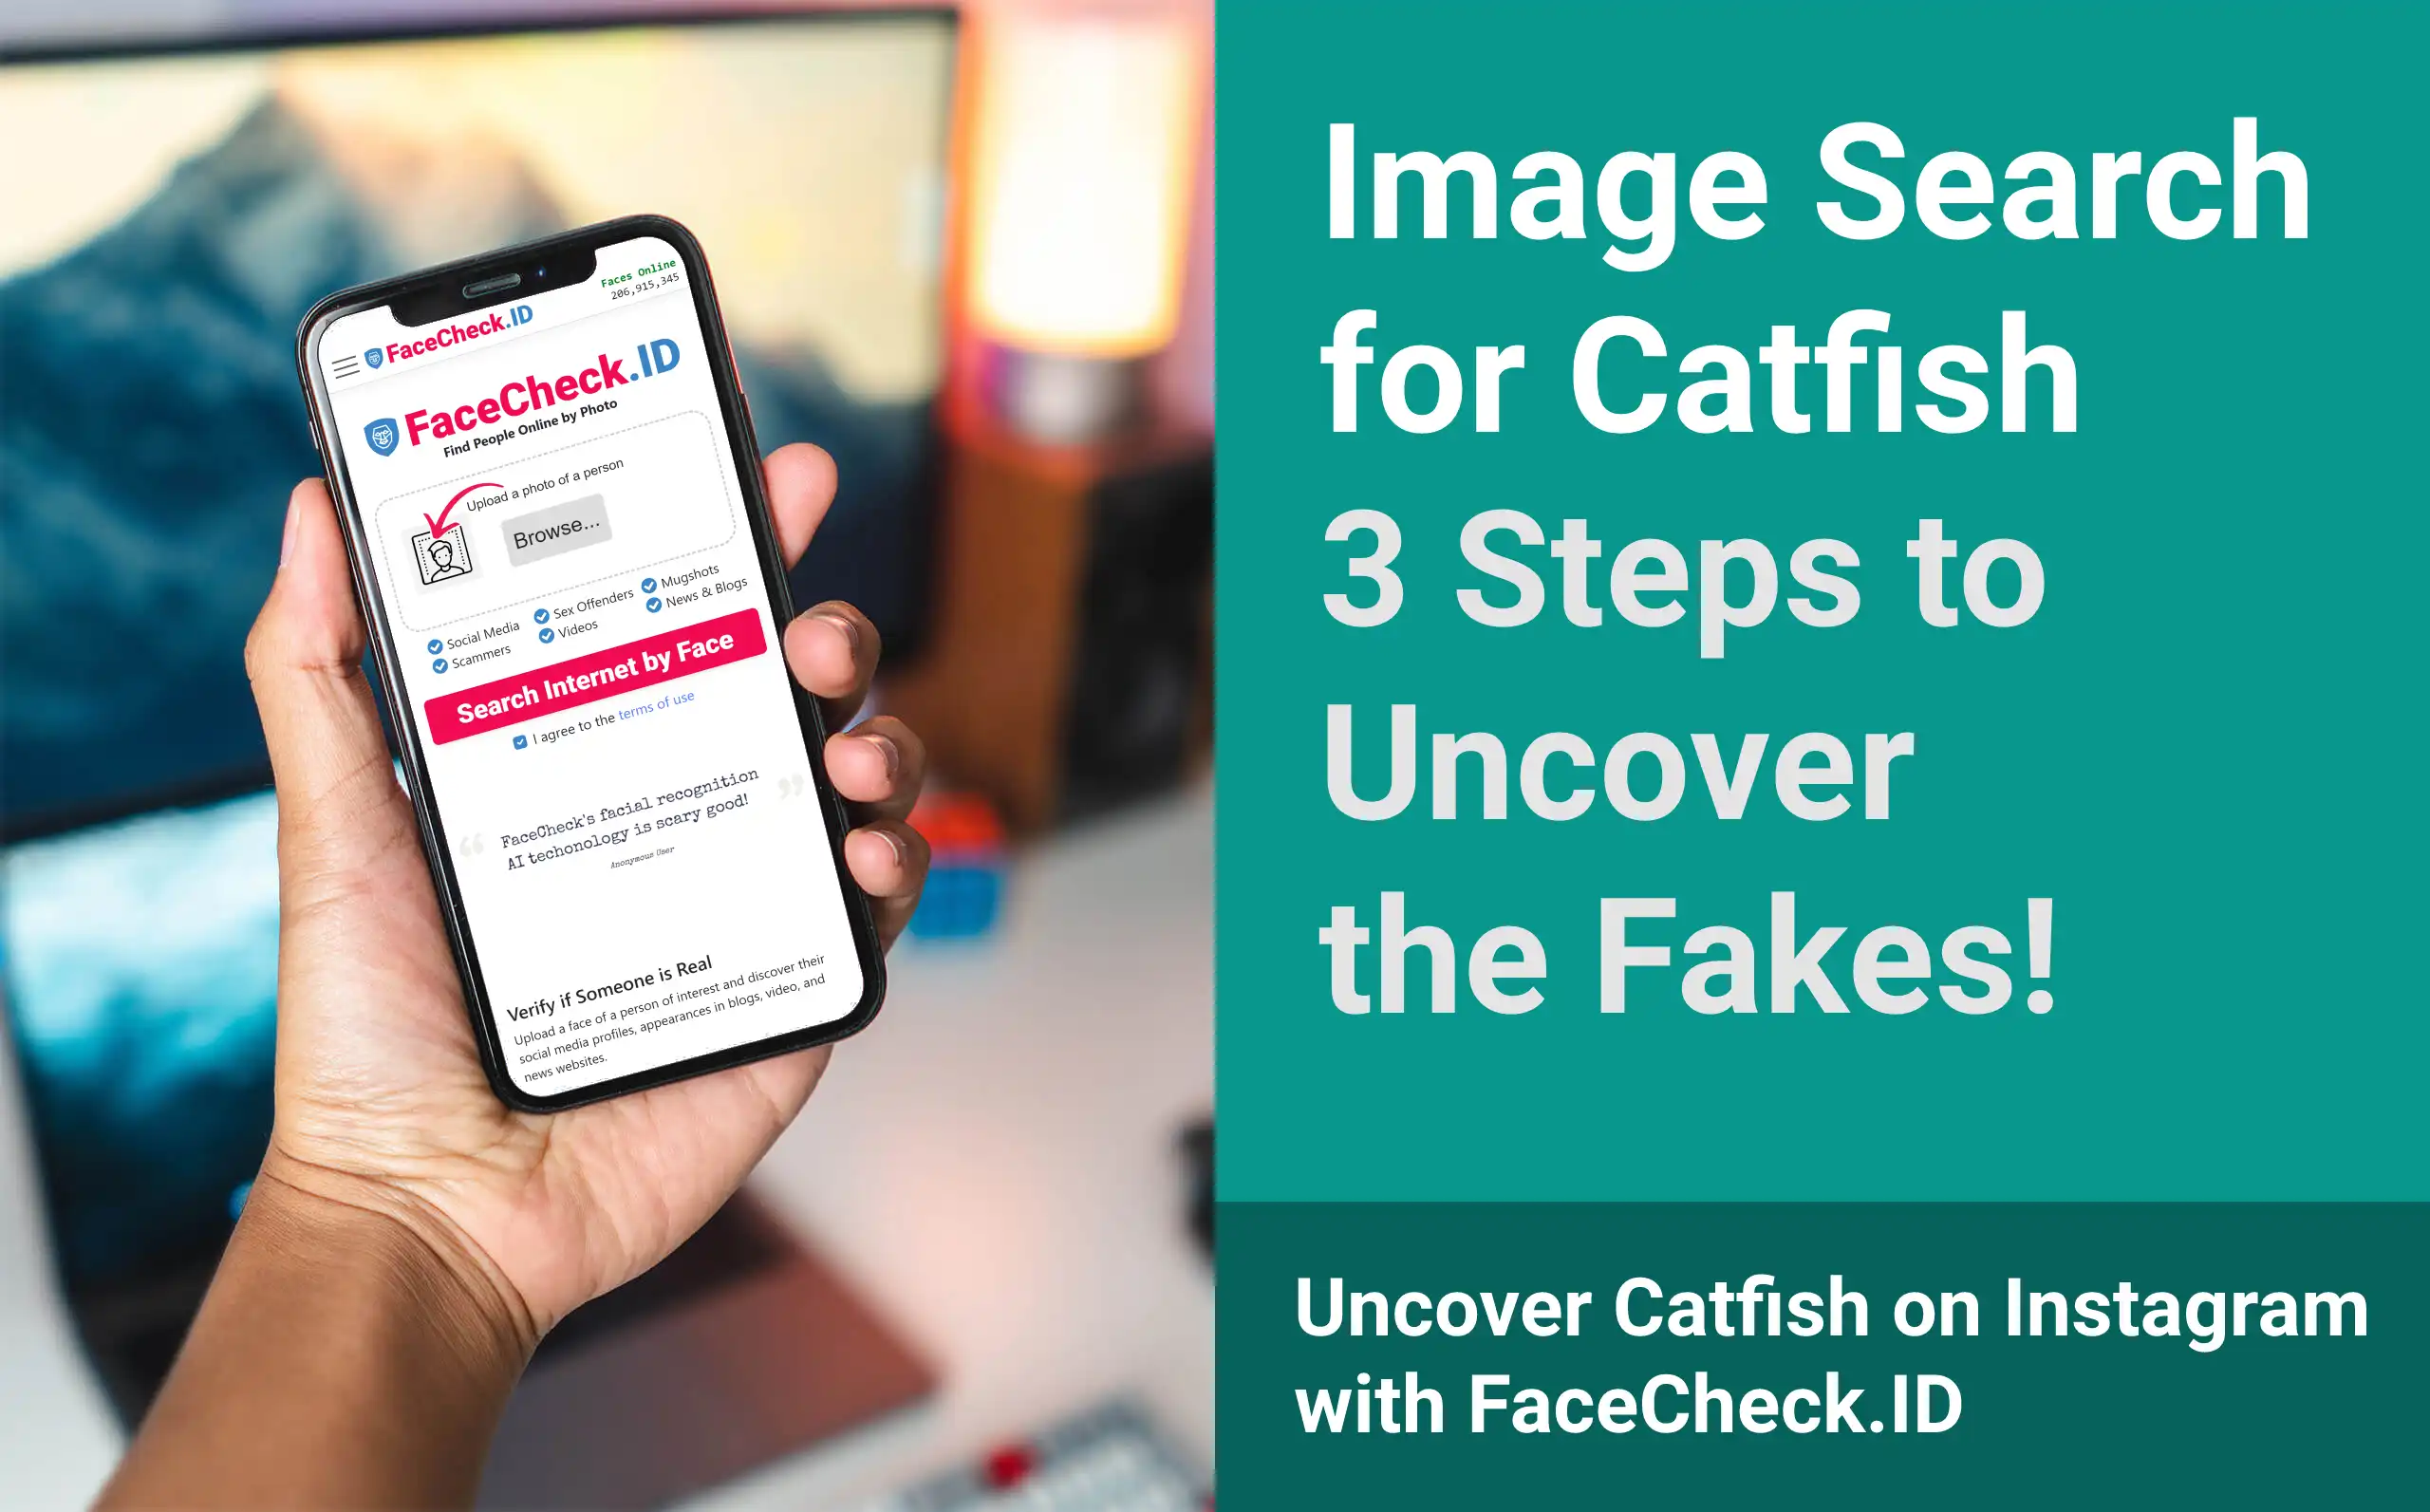 Image Search for Catfish, 3 Steps to Uncover the Fakes!